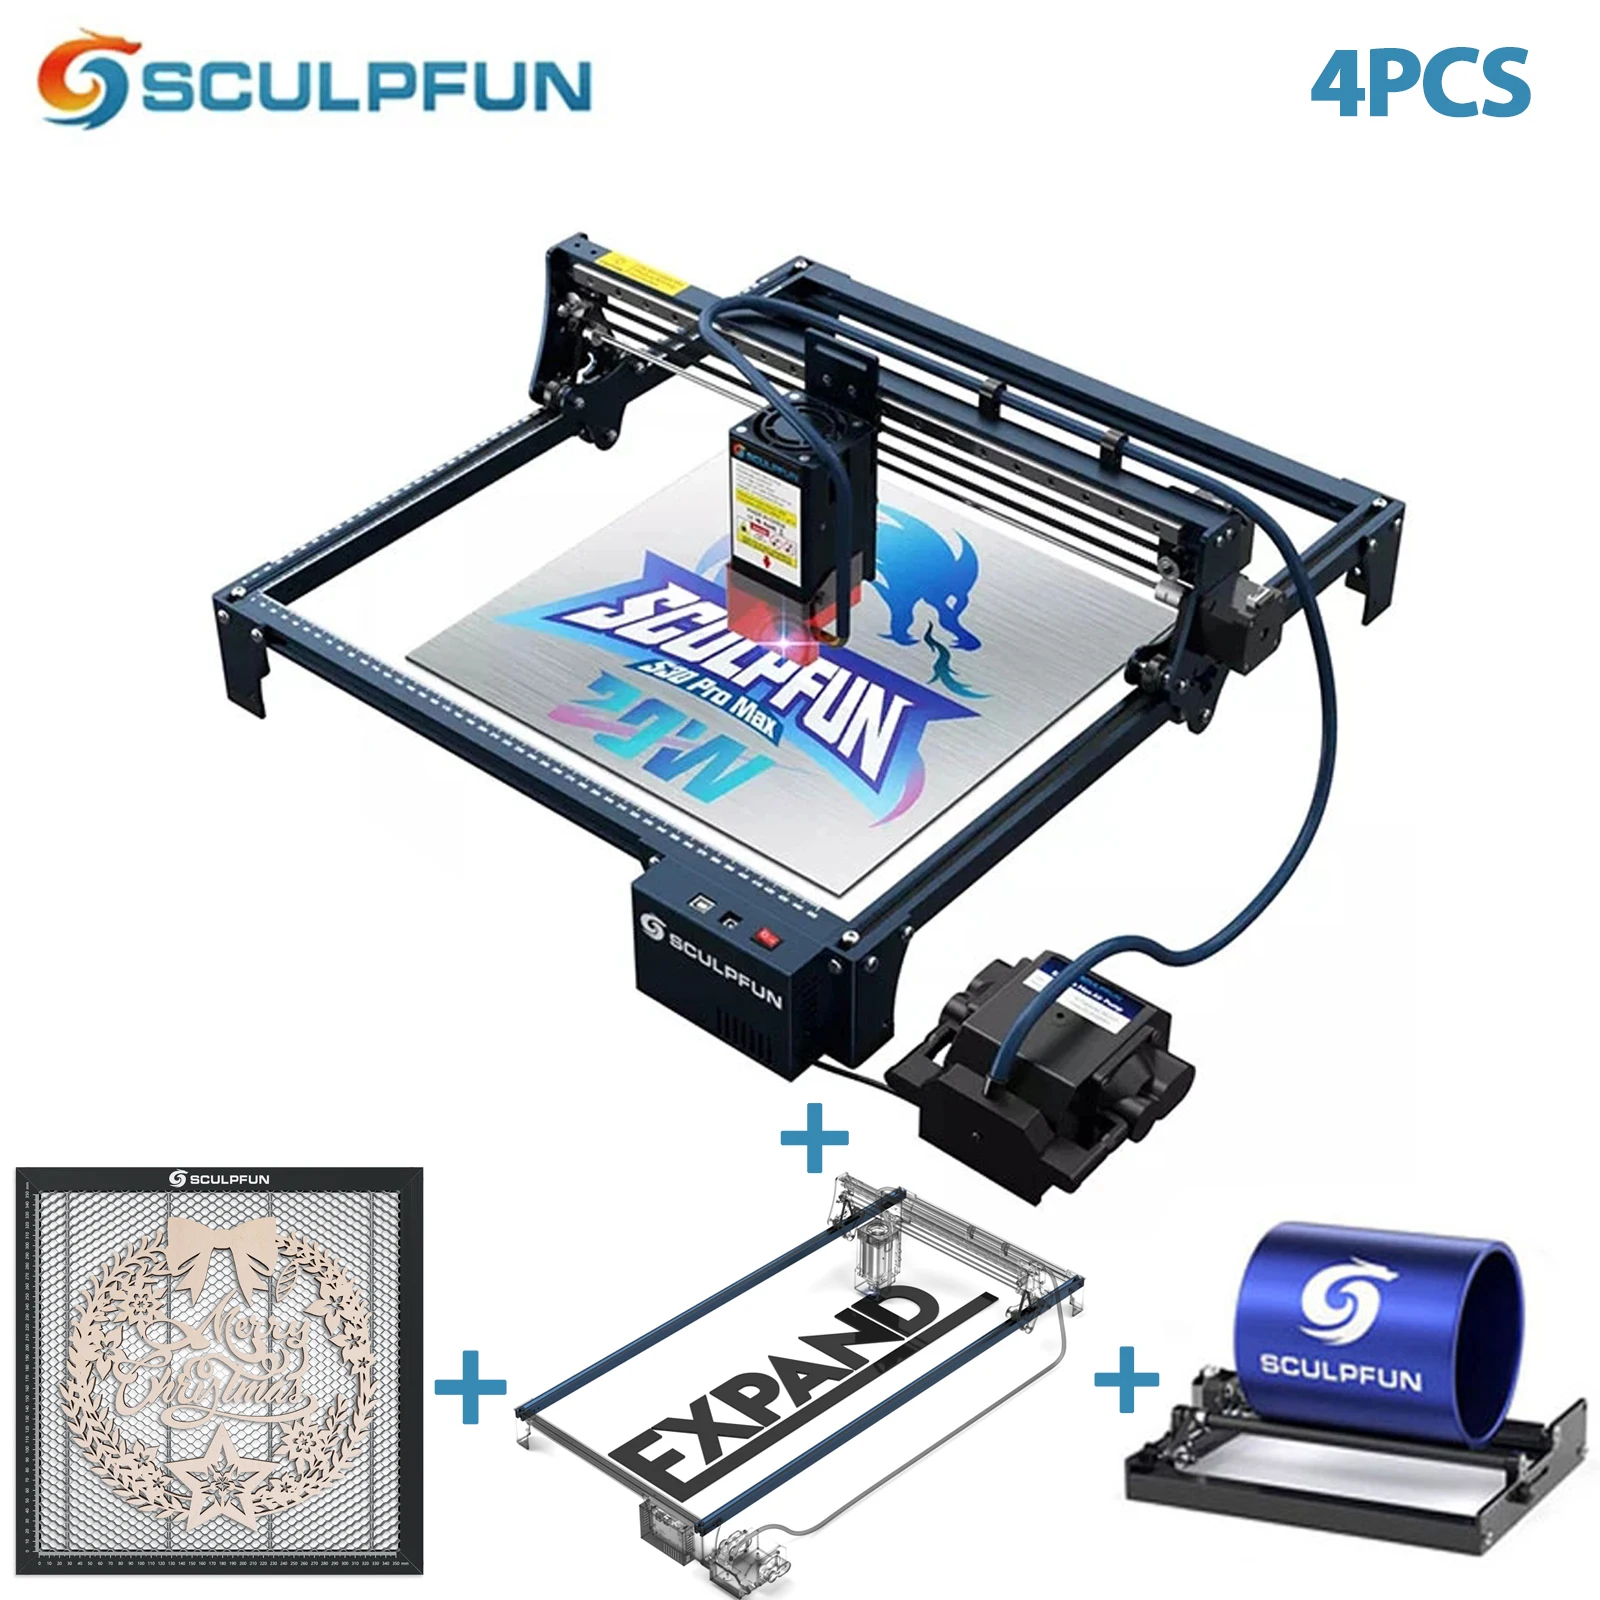 SCULPFUN S30 Pro Max Set Laser Engraver With Automatic Air-assist System 20W Engraving Machine Replaceable Lens Eye Protection 5j jee05 001 replaceable lamp with generic housing for benq projector ht2050 w1110 w2000 ht2050 ht3050 ht2150st w1210st